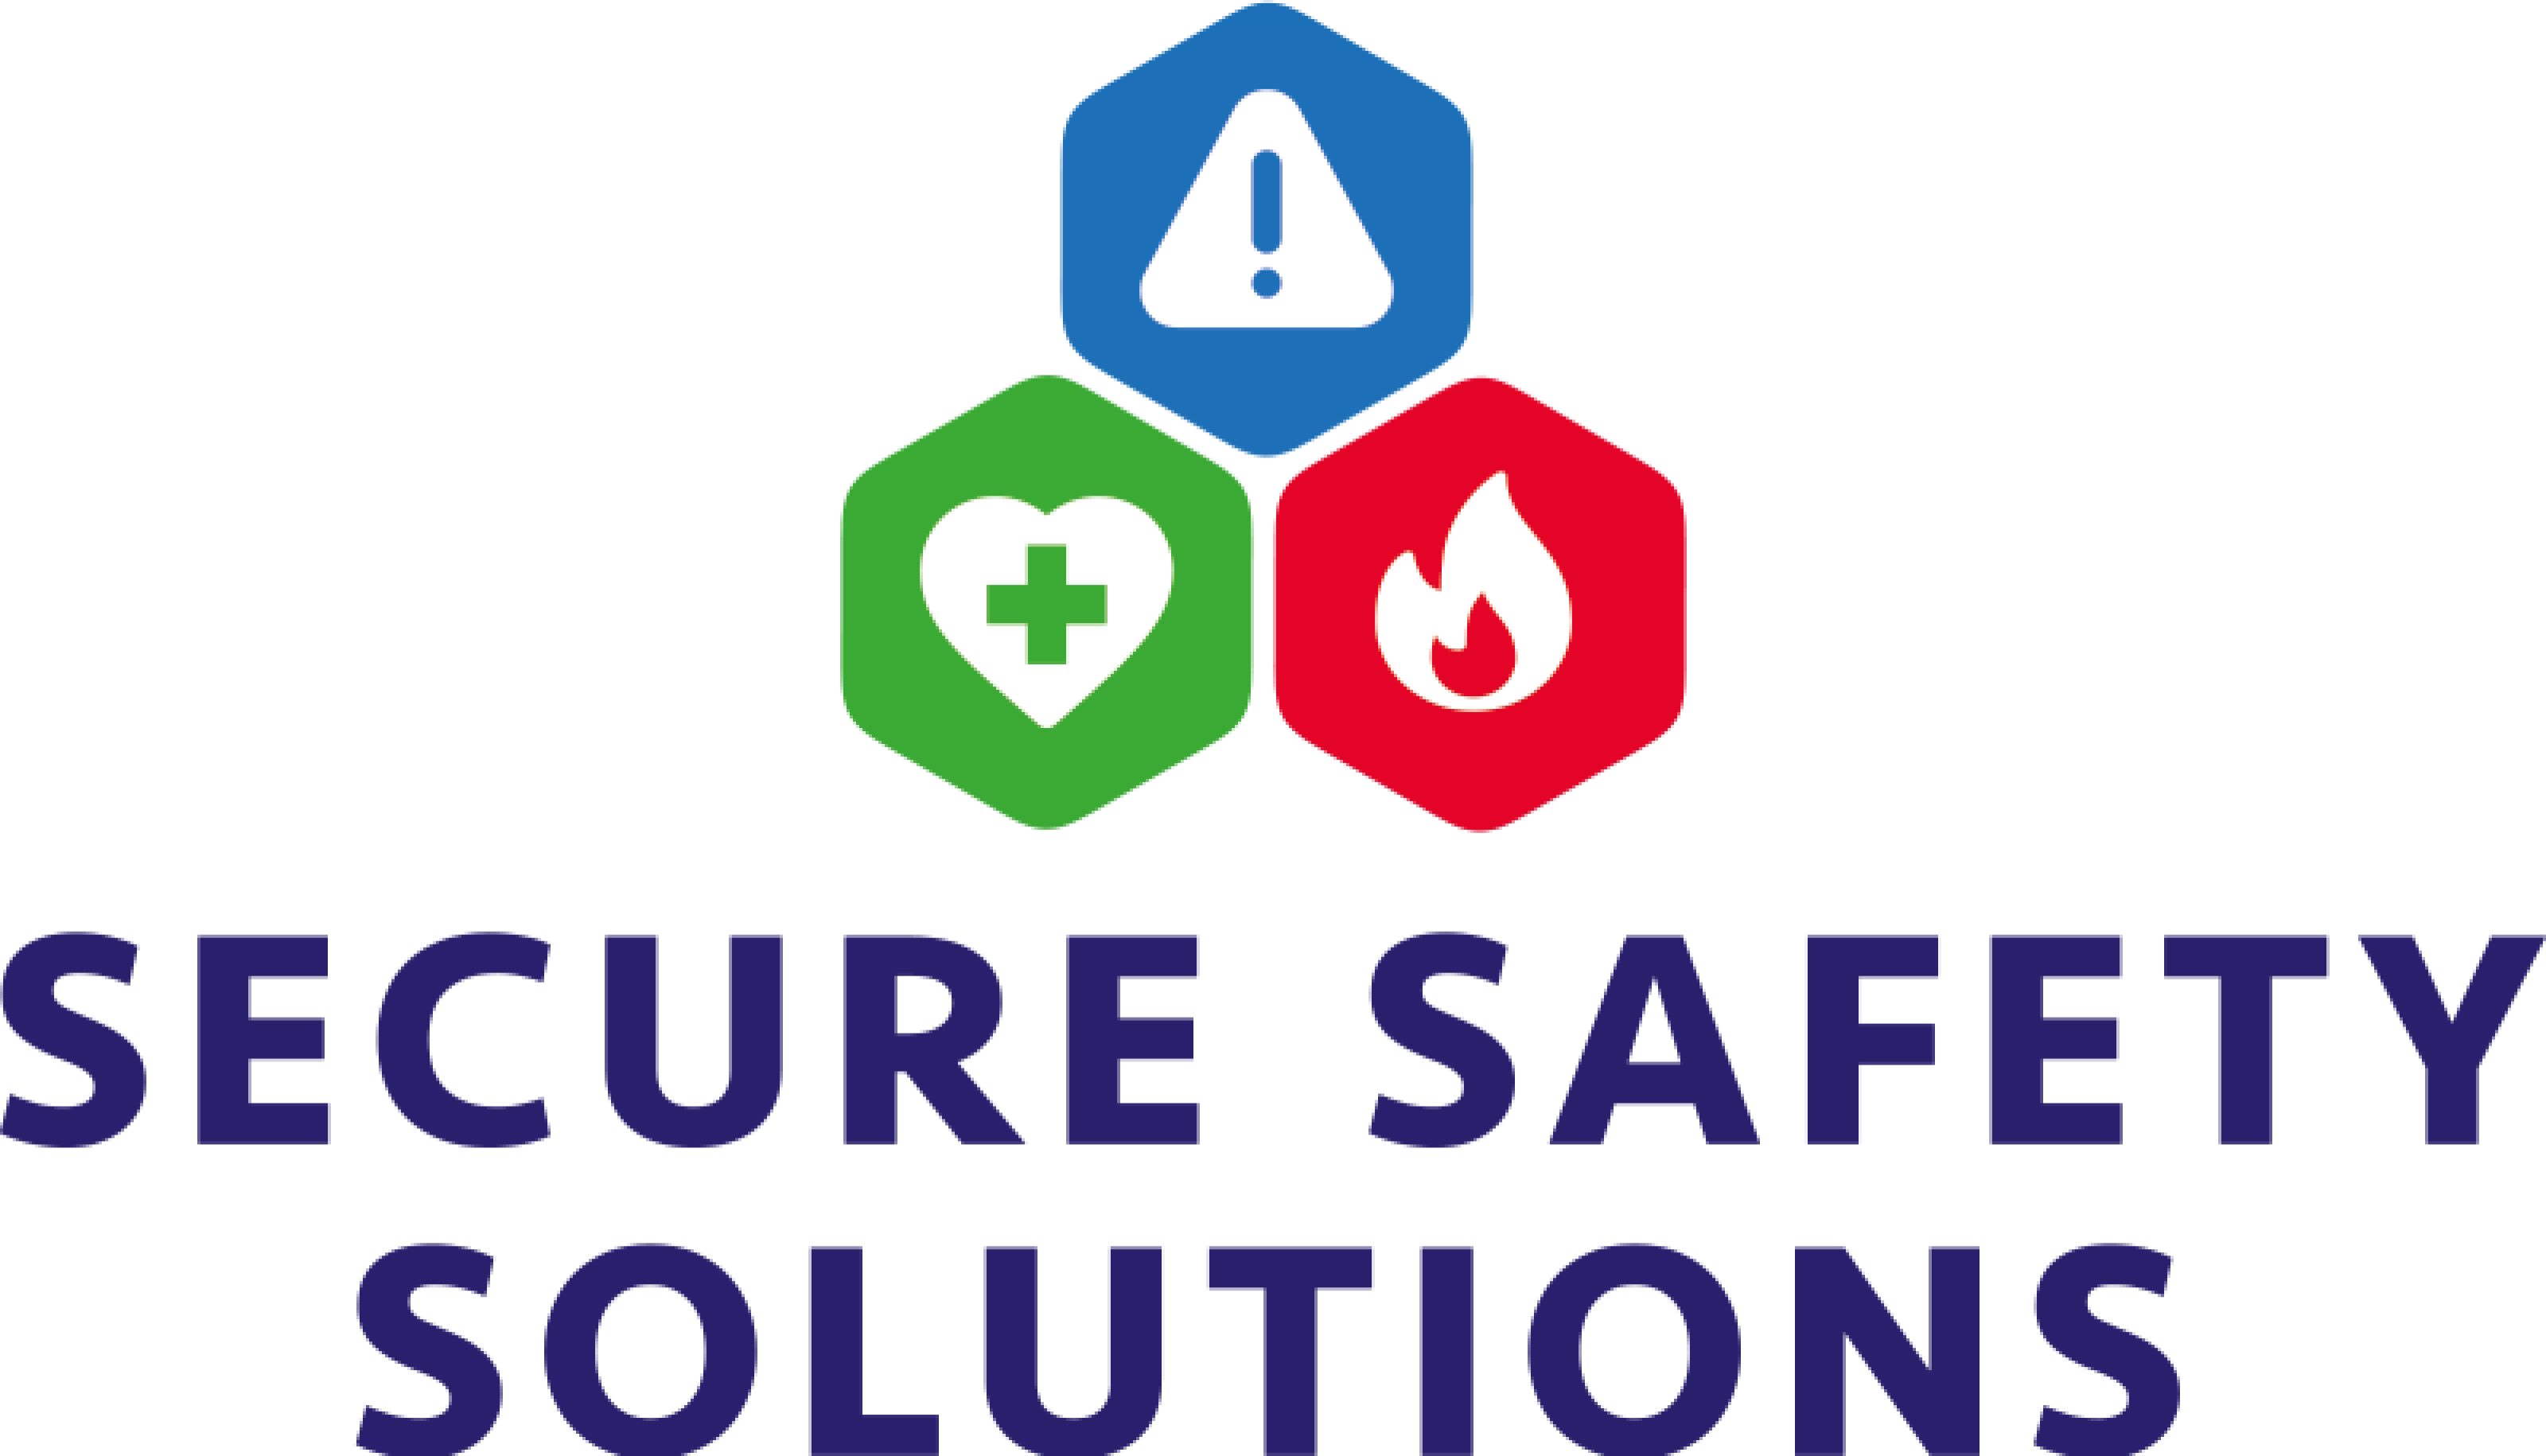 colourful secure safety solutions logo with purple text